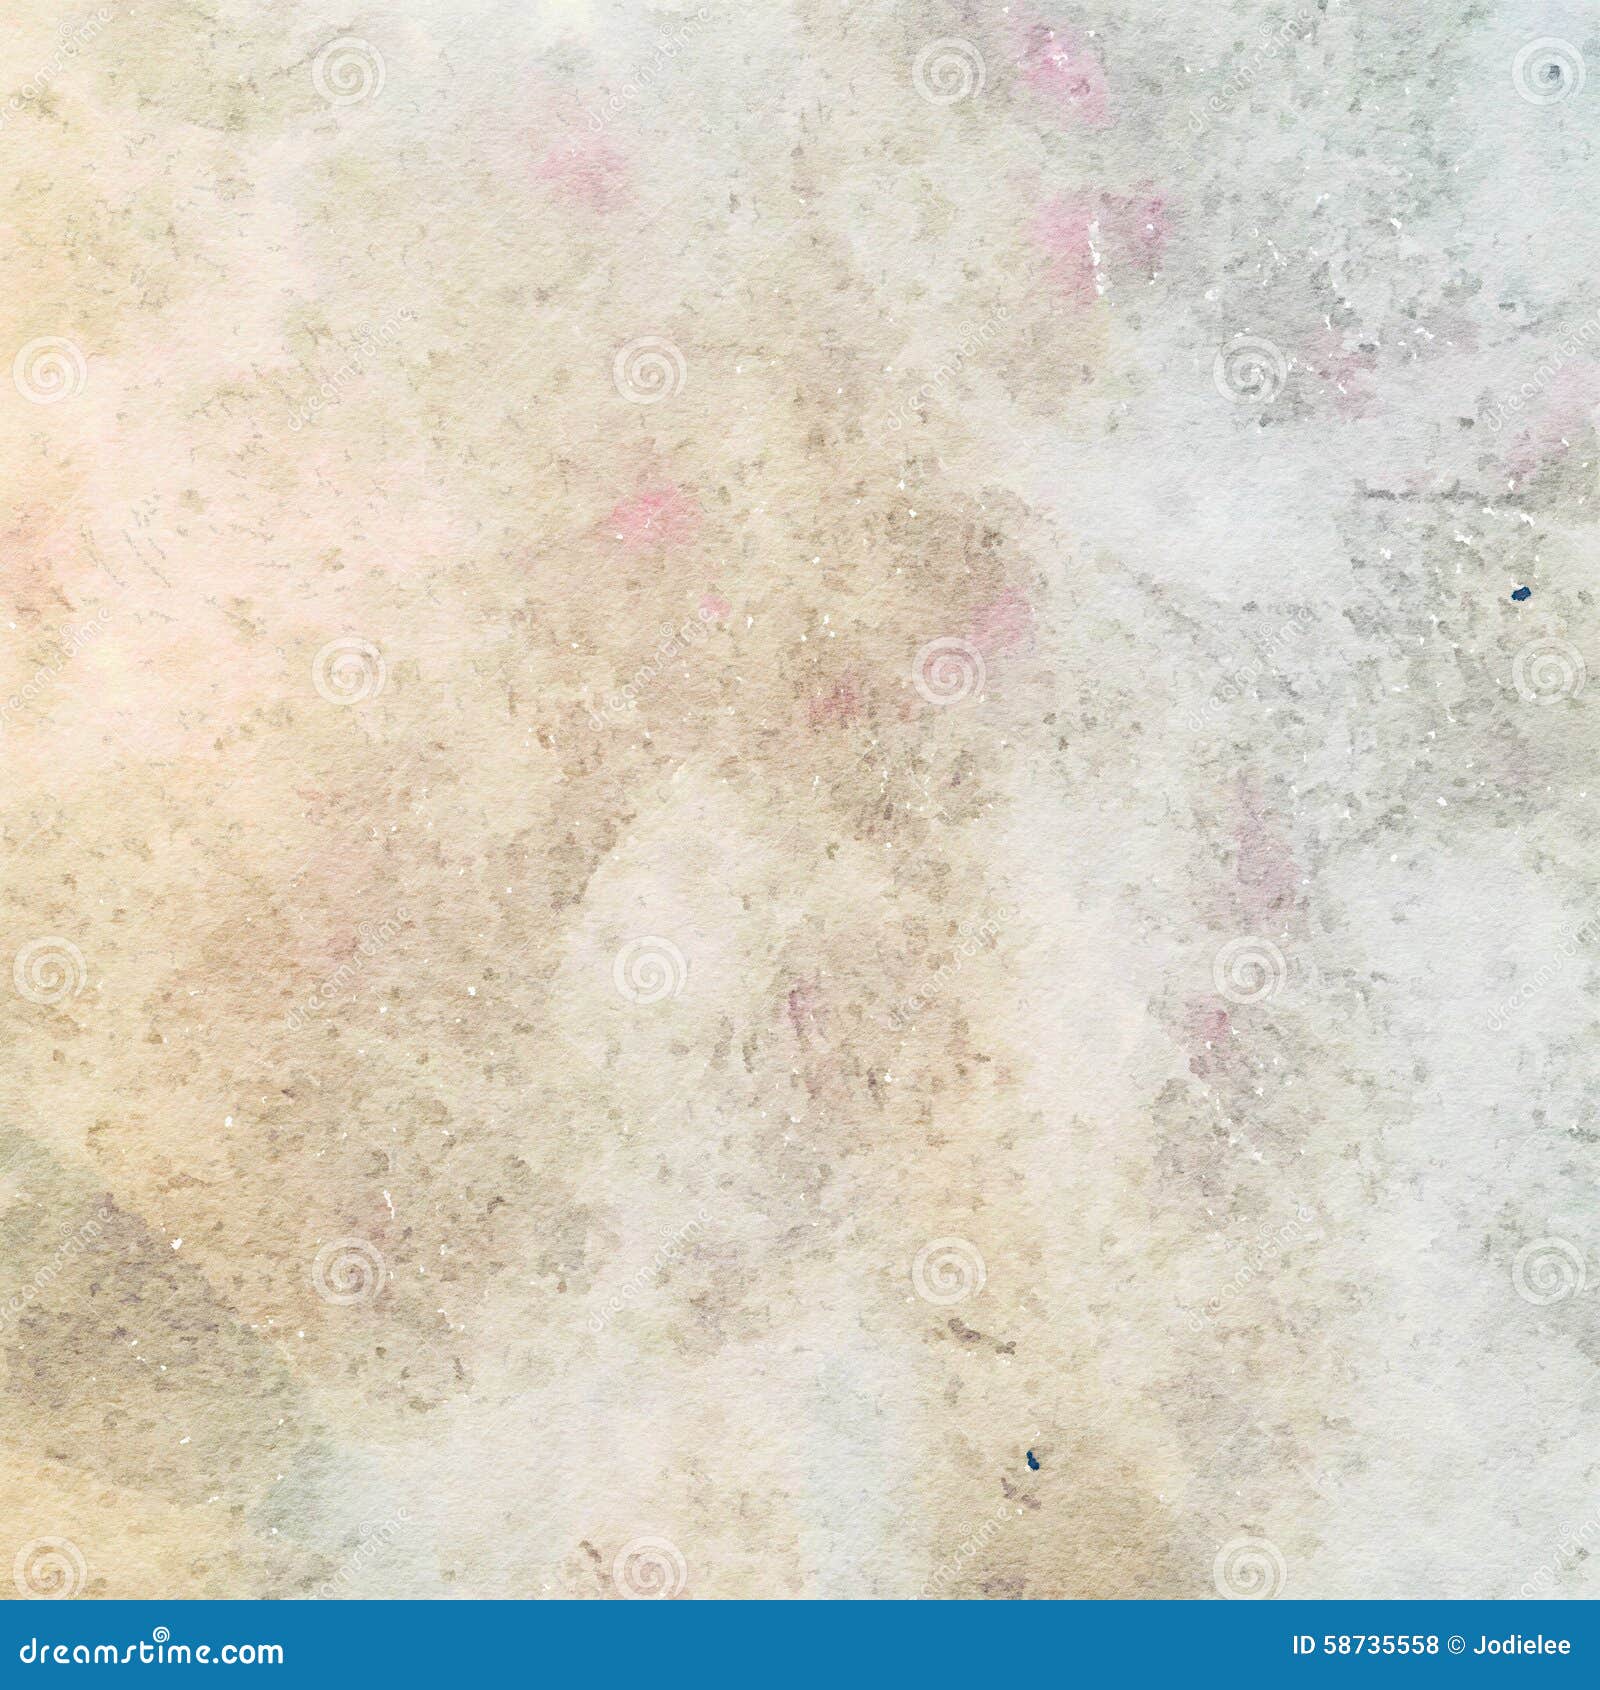 earthy grungy shabby chic watercolor texture background